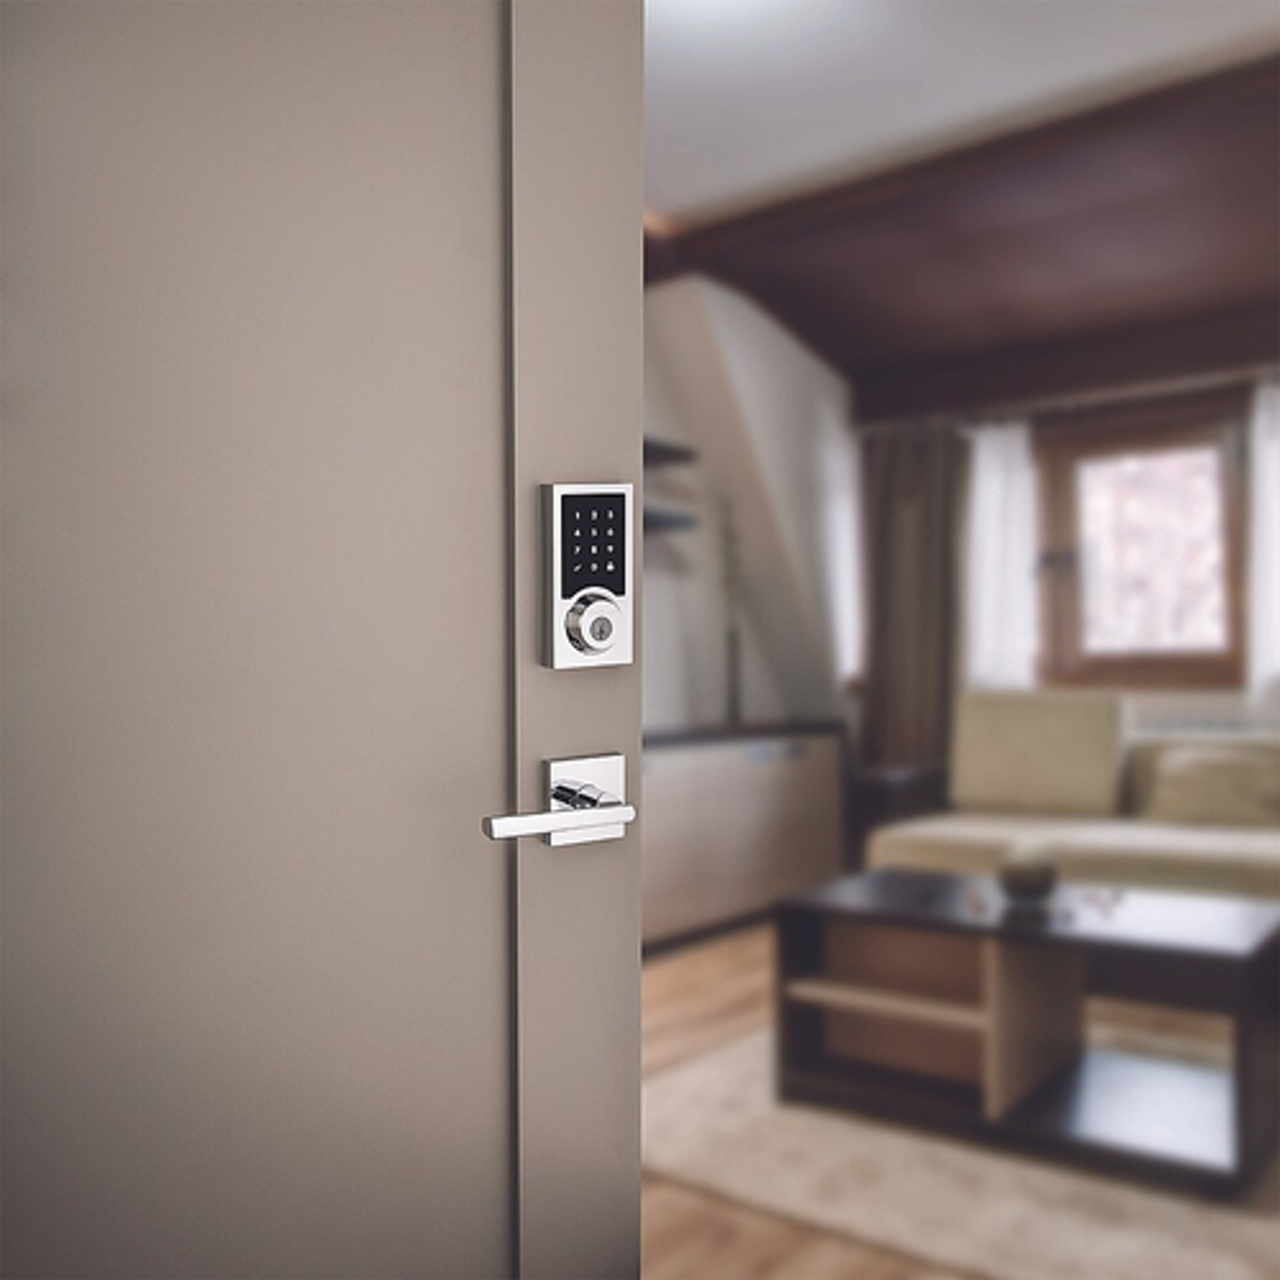 Kwikset - 916 Smart Lock Z-Wave Replacement Deadbolt with App/Touchscreen/Key Access - Polished Chrome